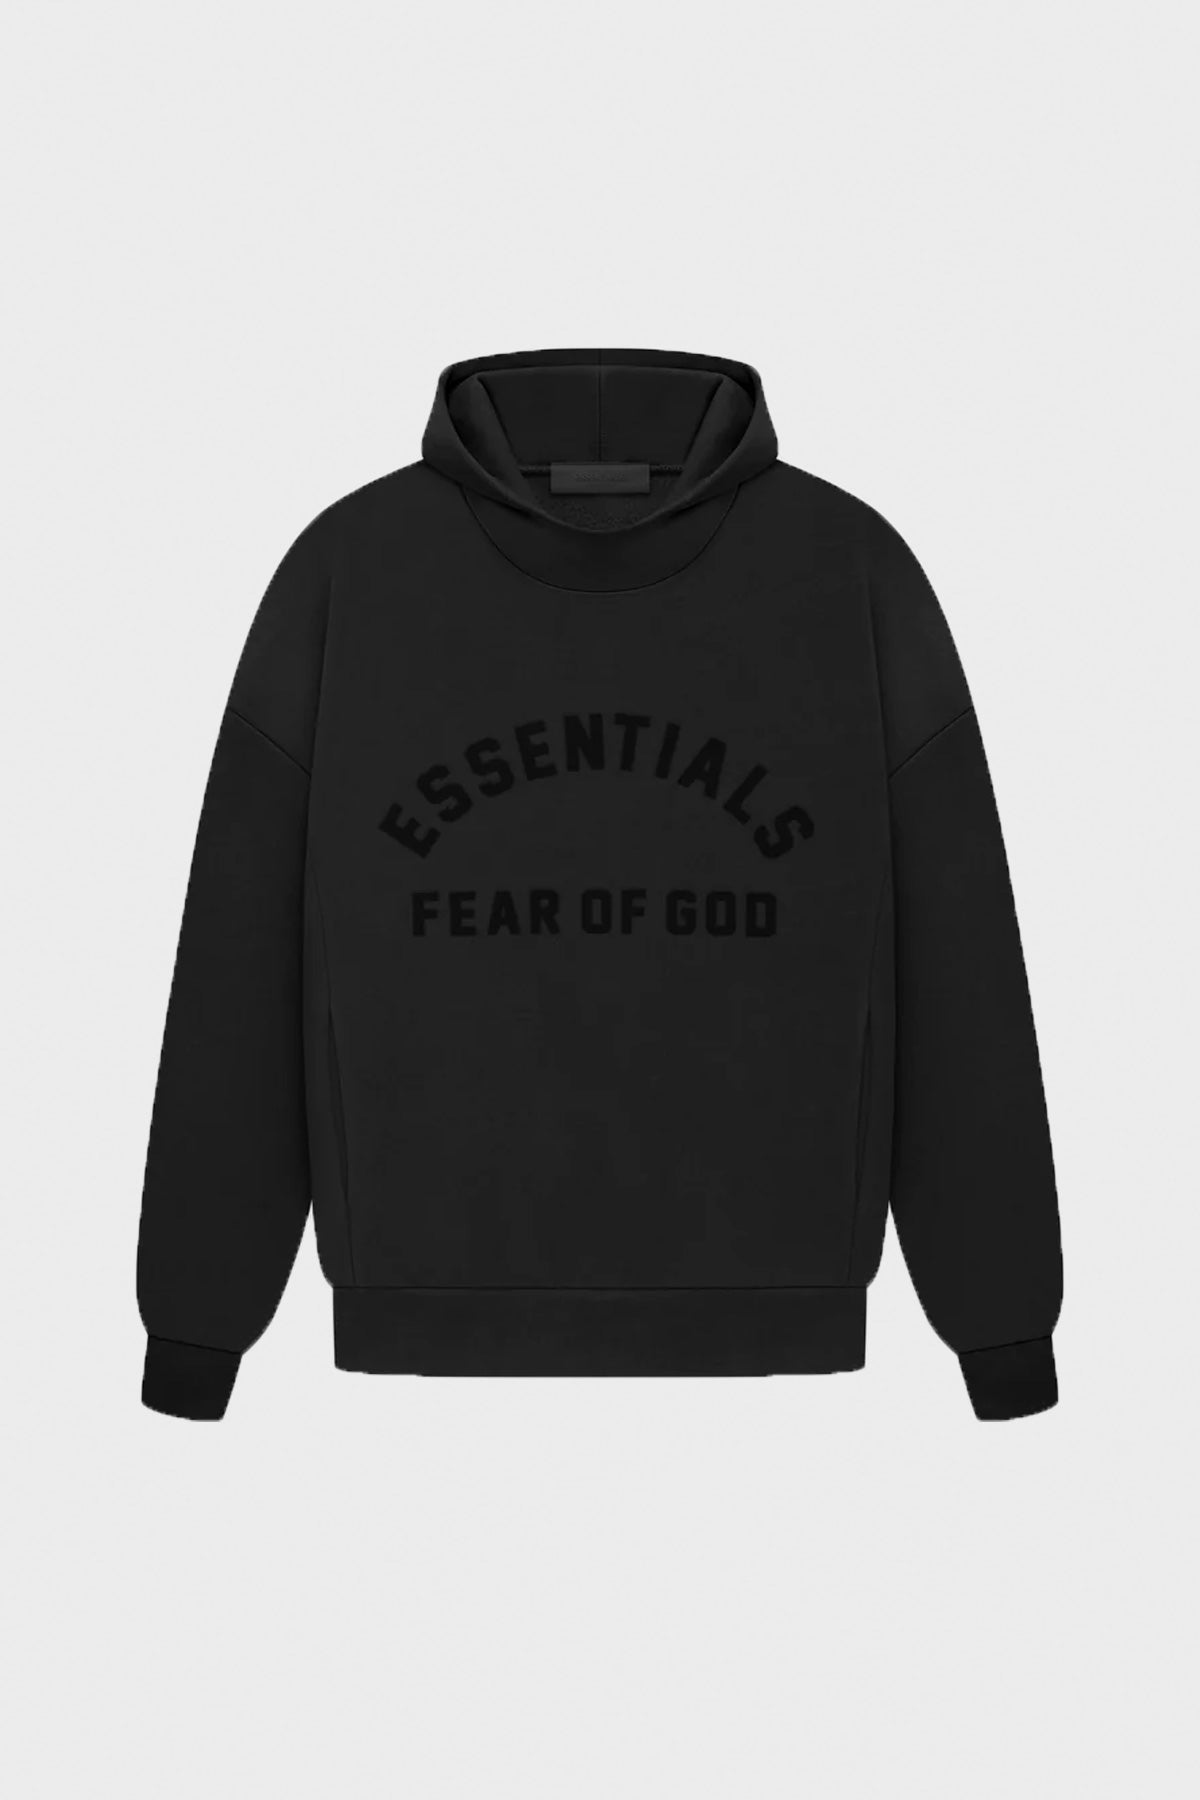 Fear of God Essentials Core Collection Pullover Hoodie Black